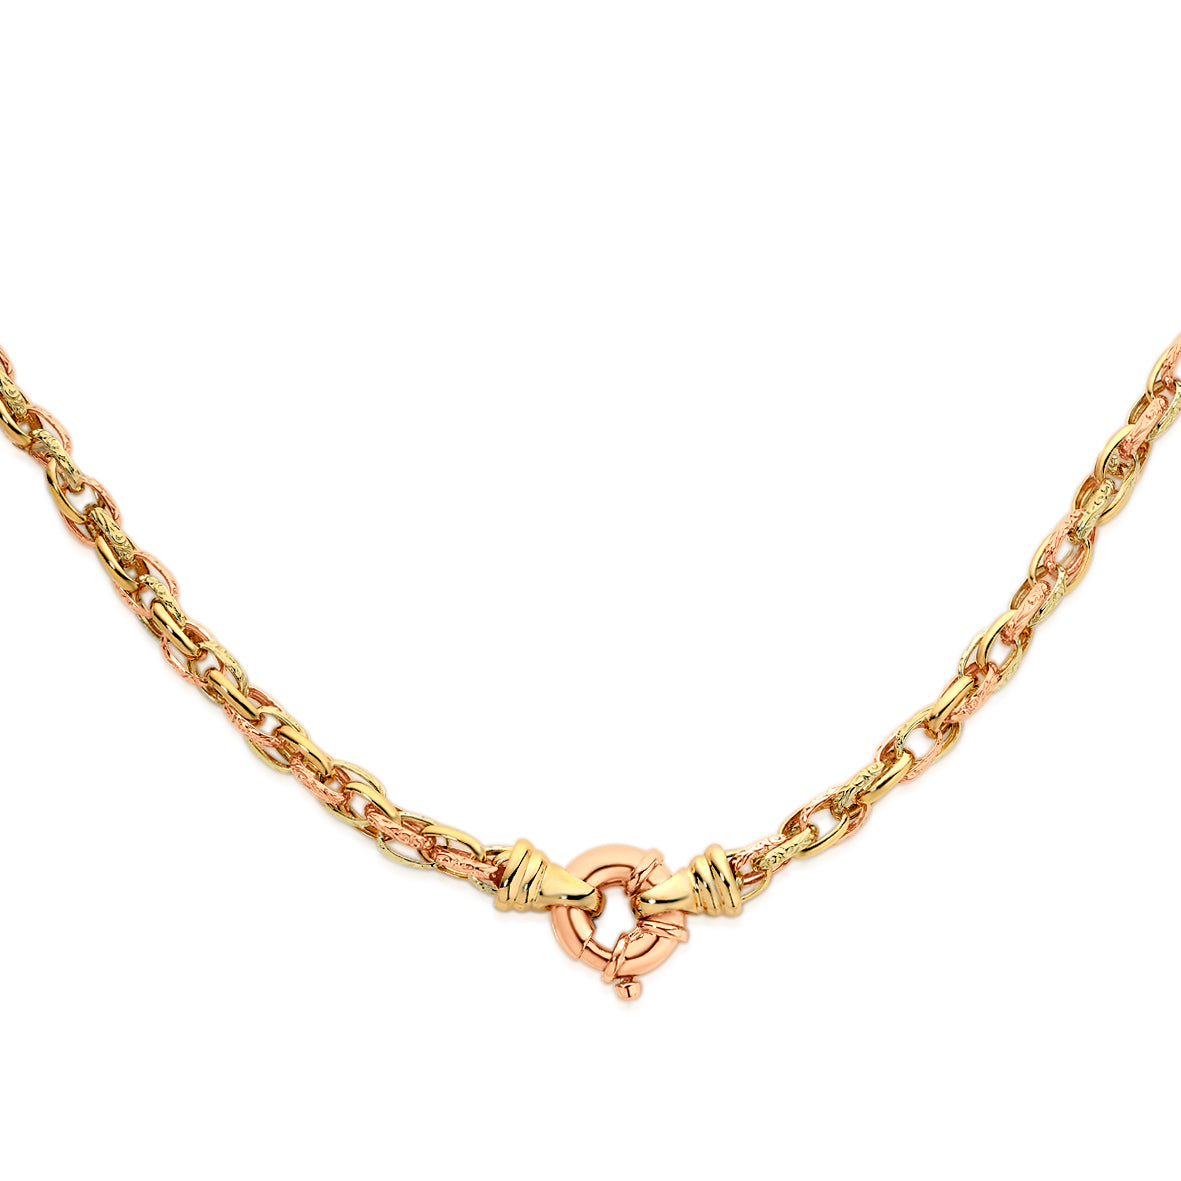 9ct 3 tone solid gold necklace